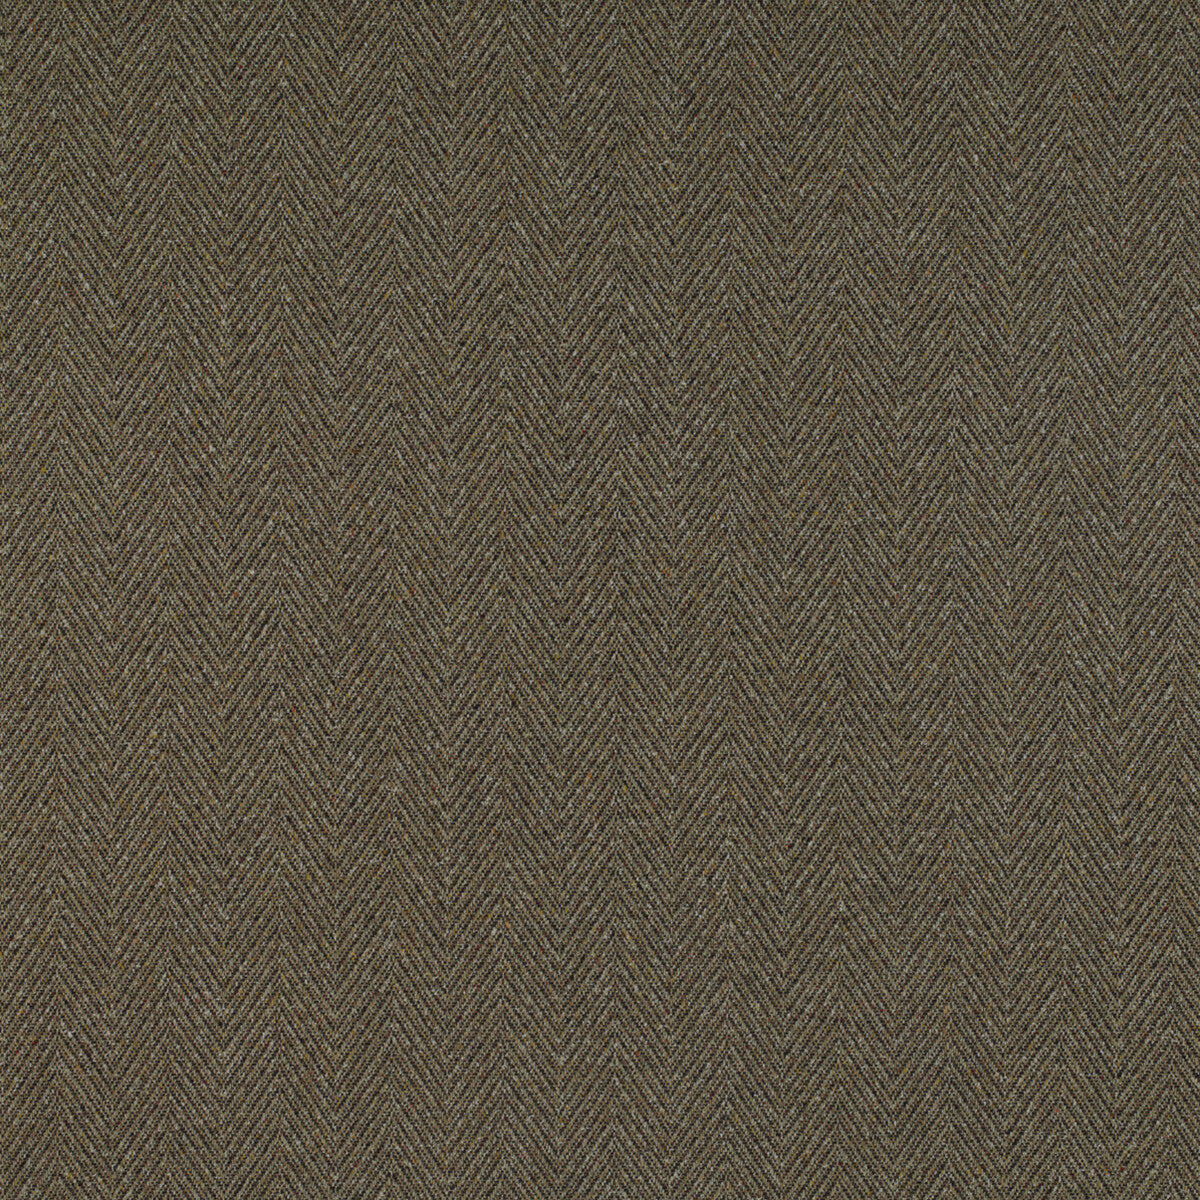 Bolzano fabric in amarillo/chocolate color - pattern GDT5319.008.0 - by Gaston y Daniela in the Tierras collection